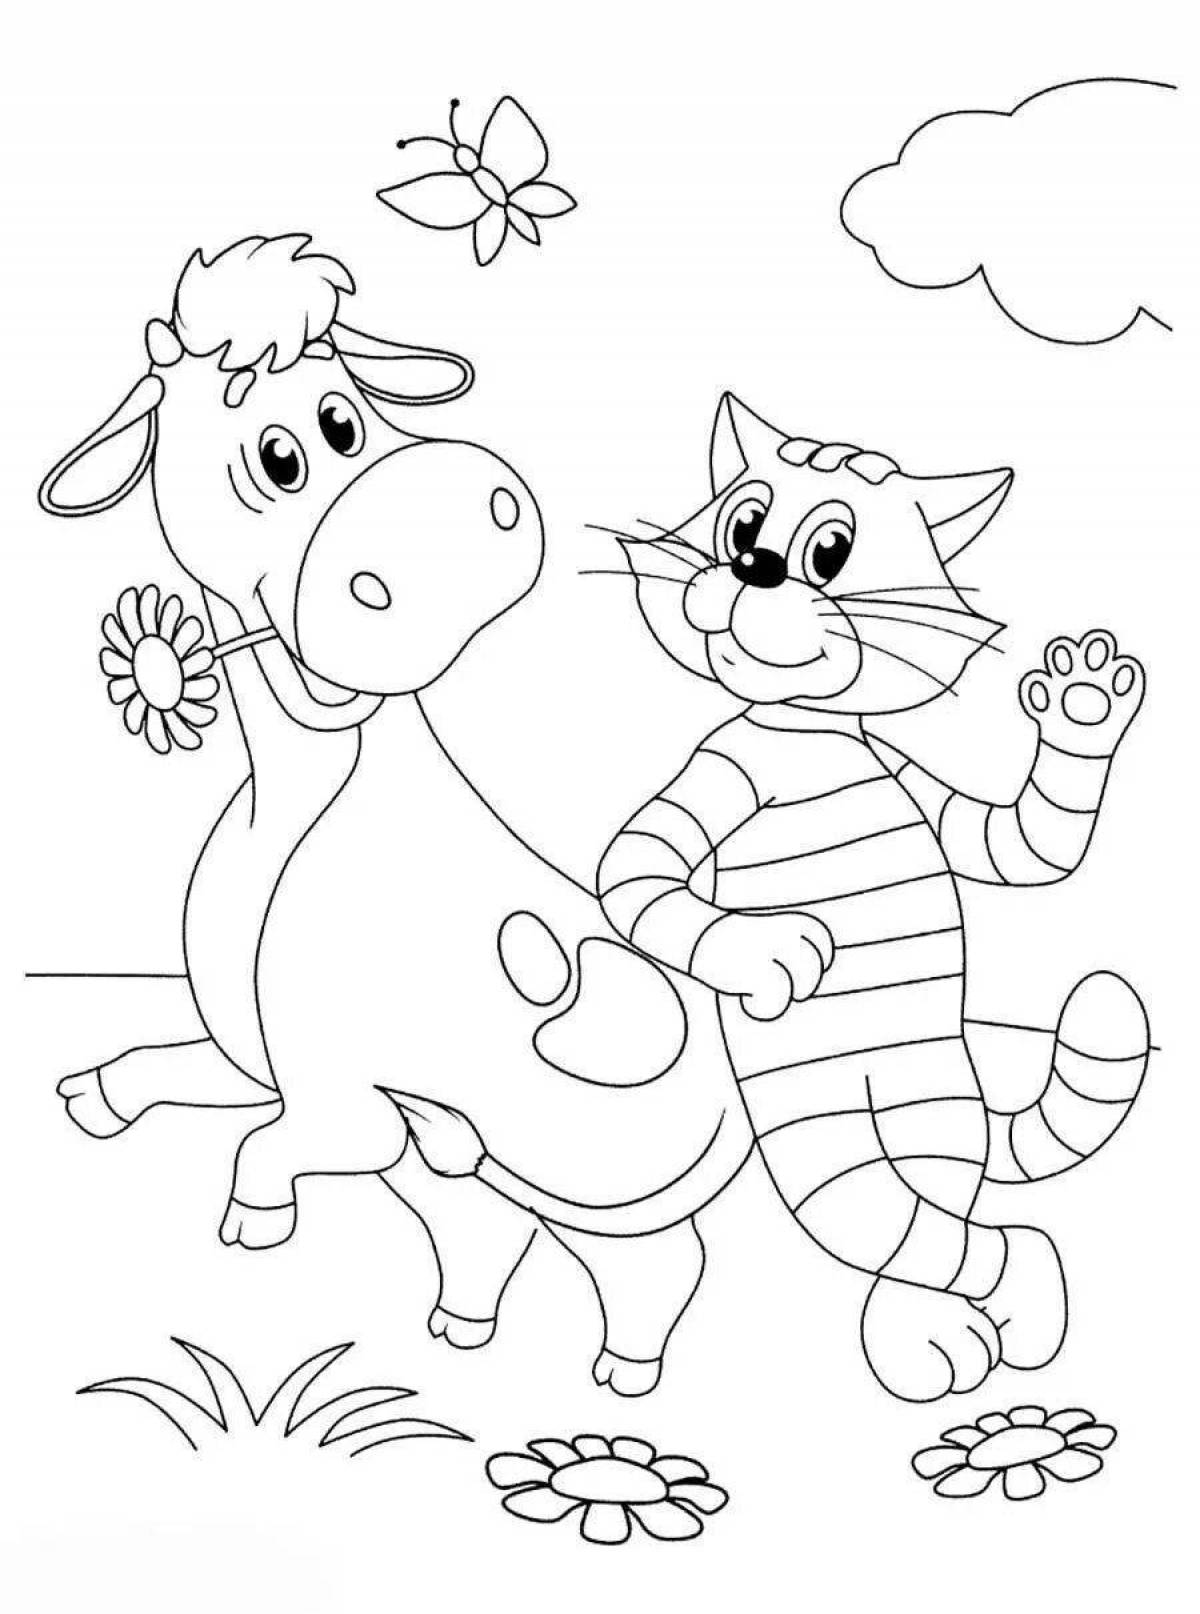 Fun sailor skin coloring page for babies